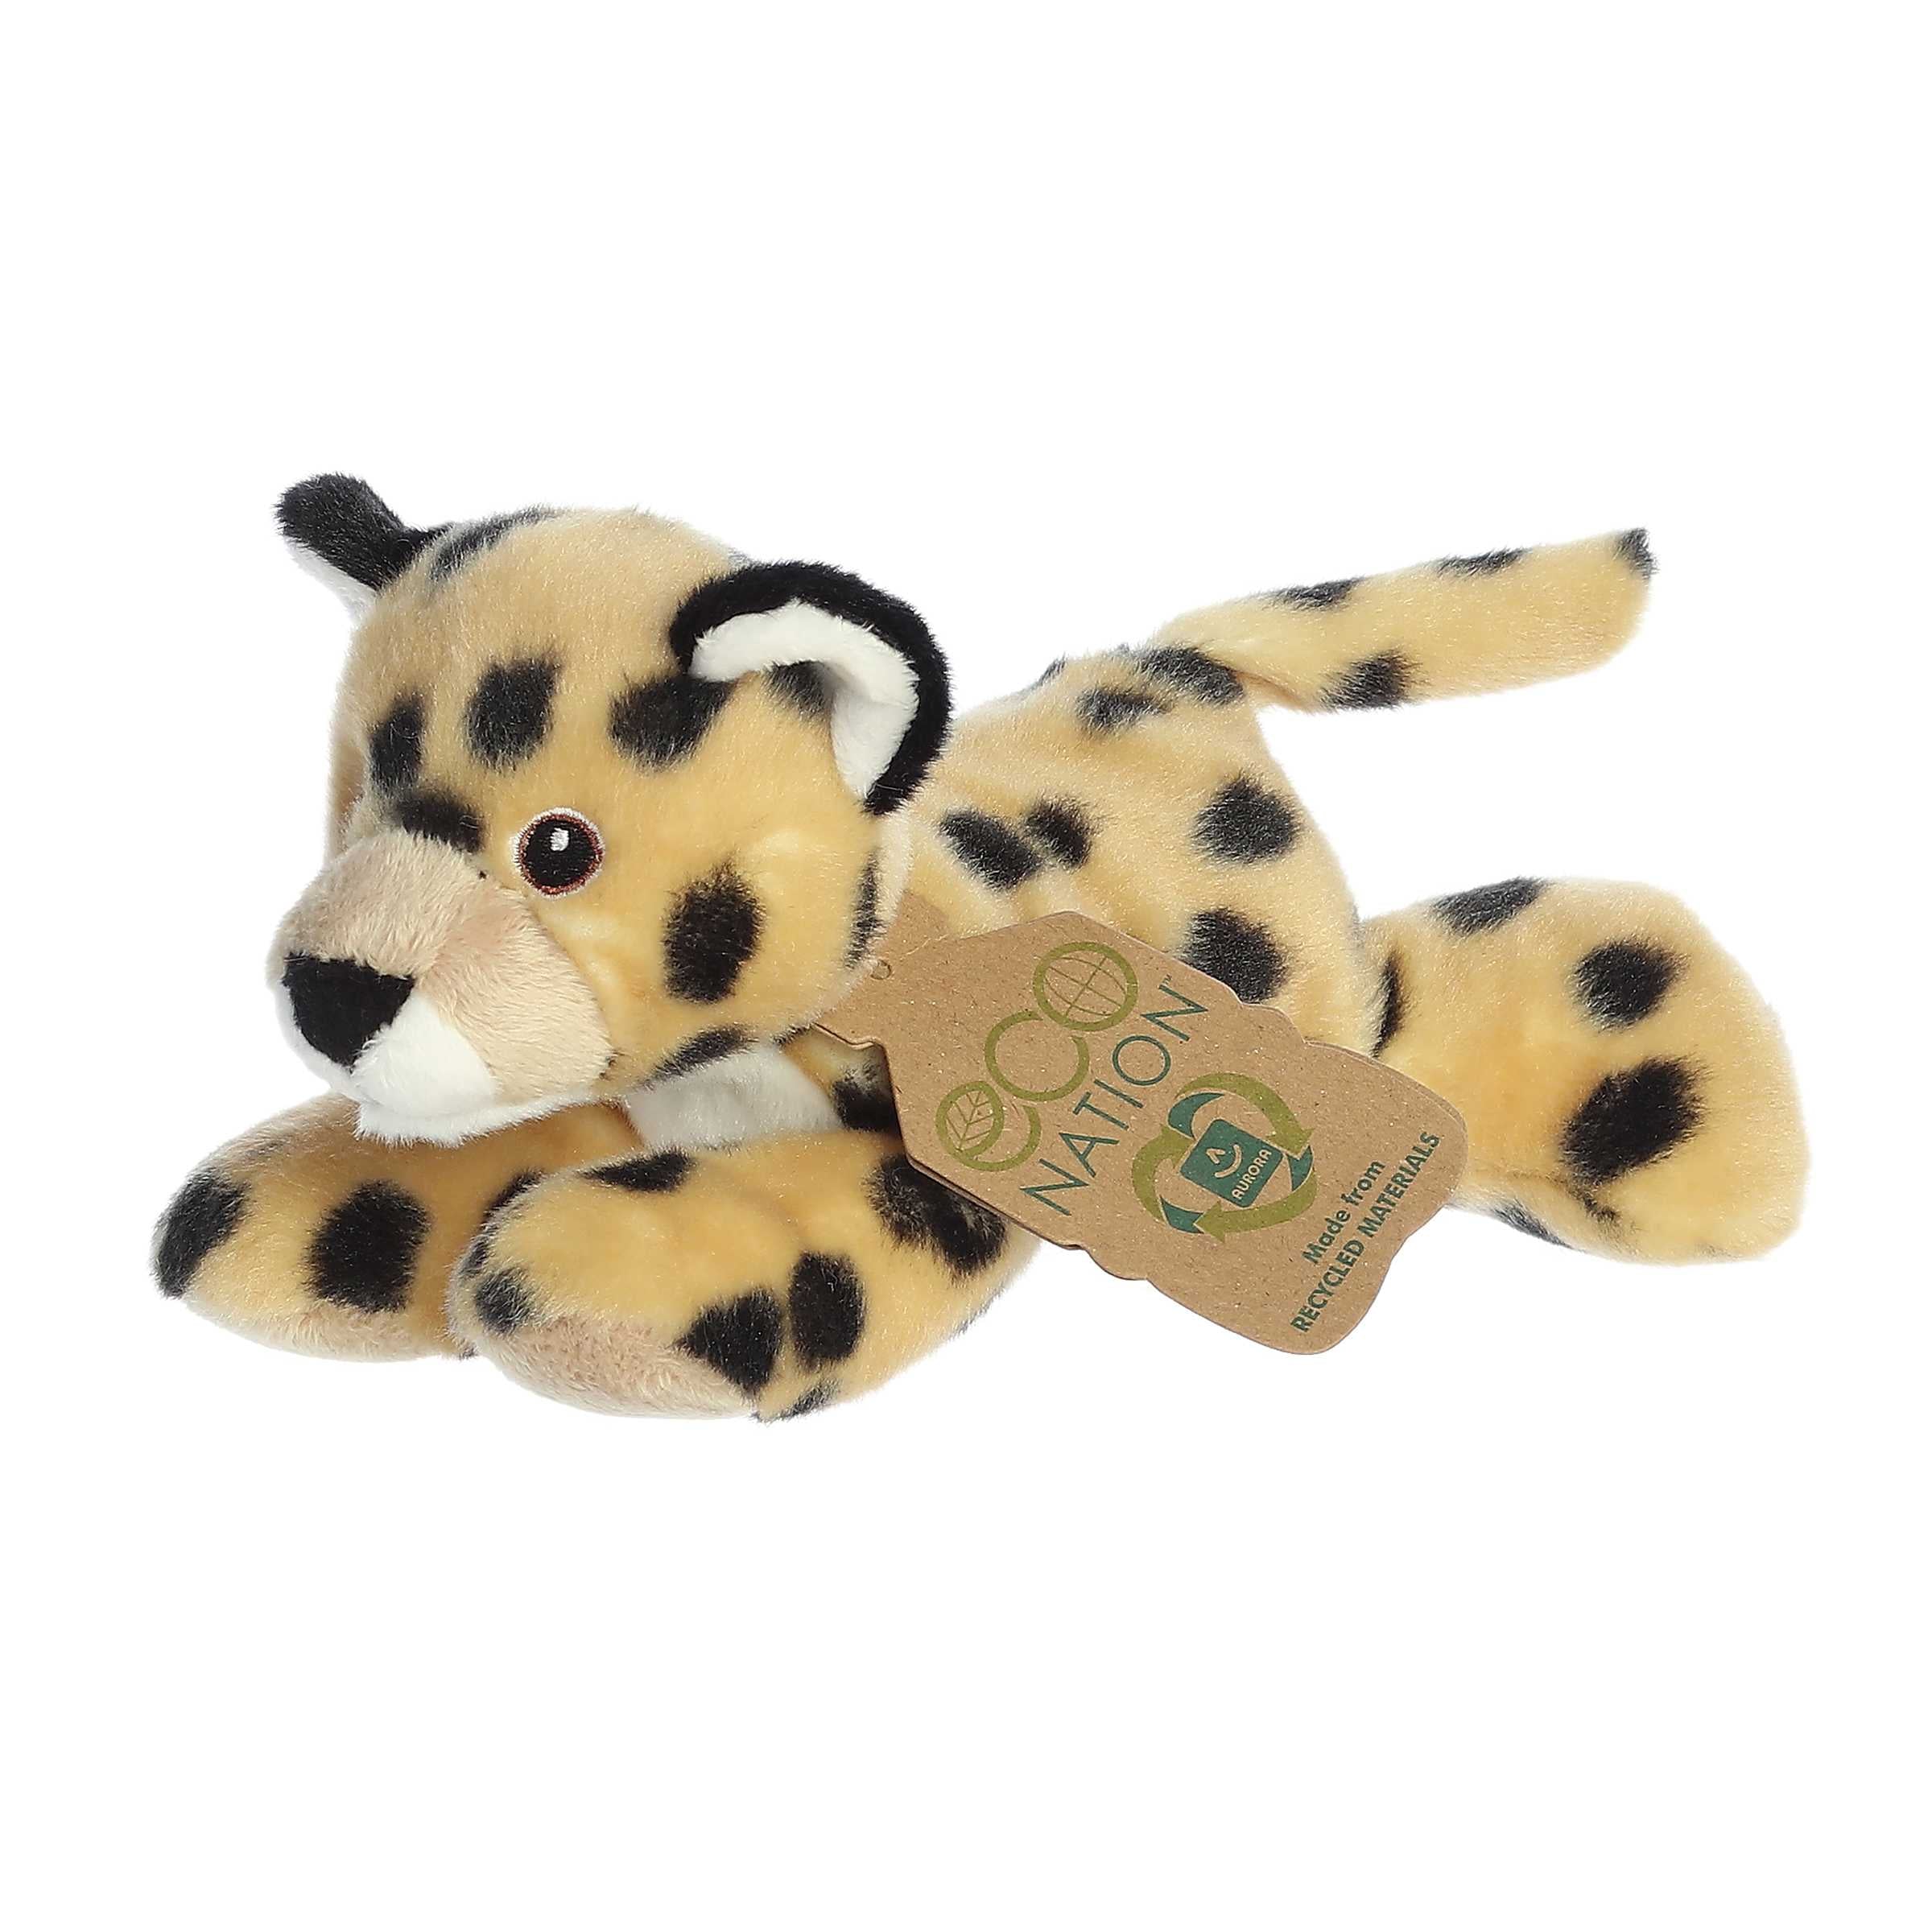 Eco Softie Cheetah Plush, golden fur with spots, made from recycled materials, featuring 'Eco Nation' tag on its neck.